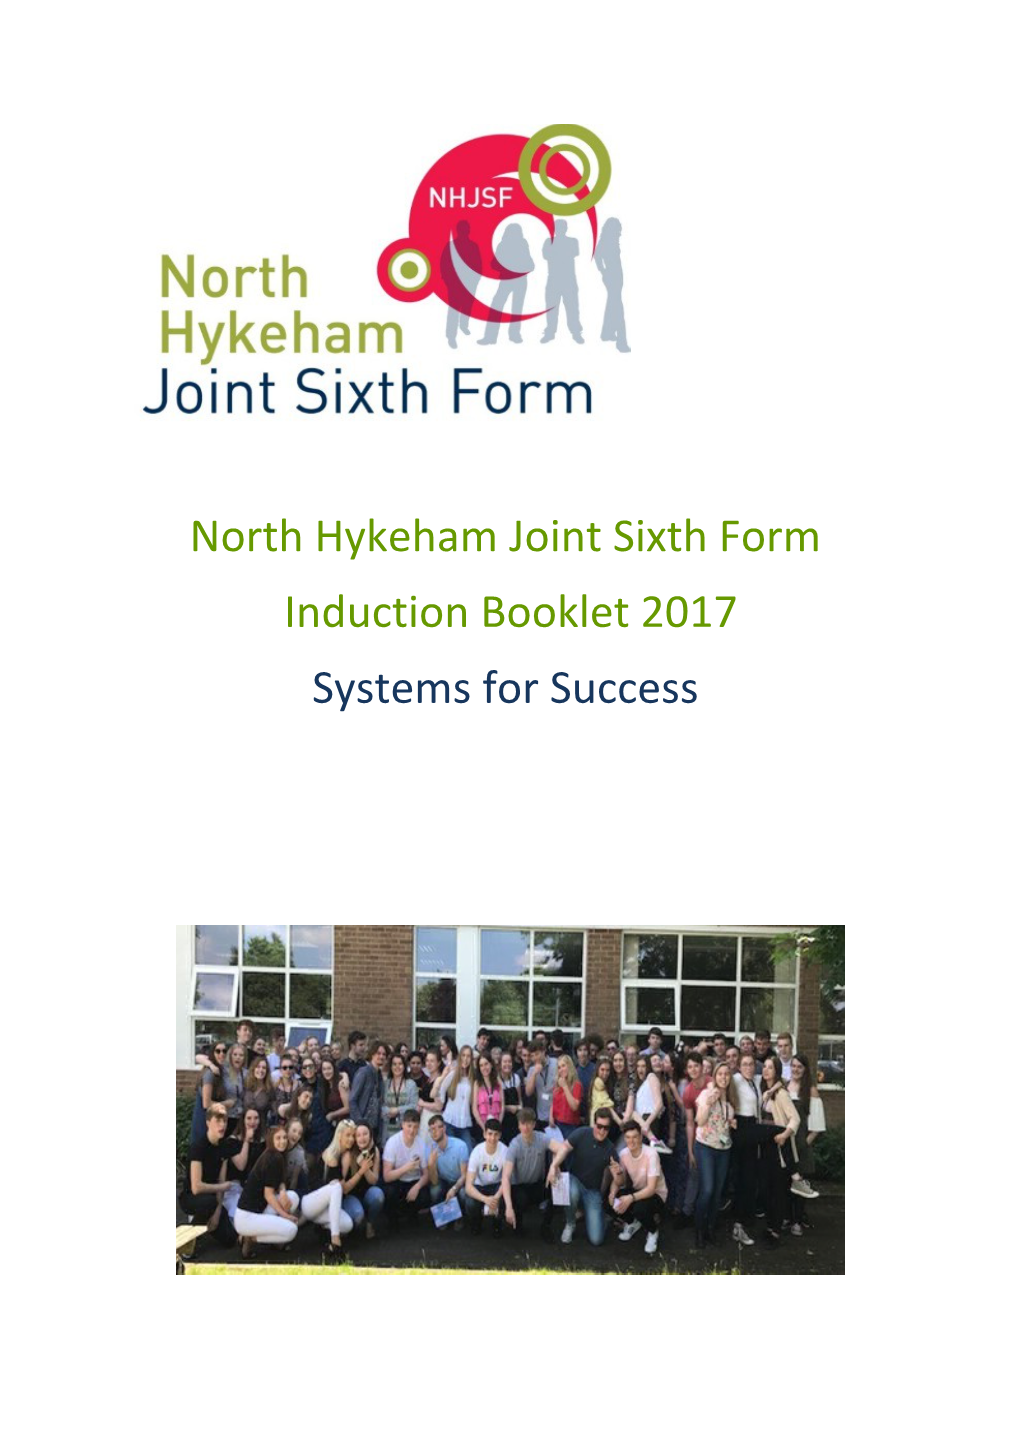 North Hykeham Joint Sixth Form